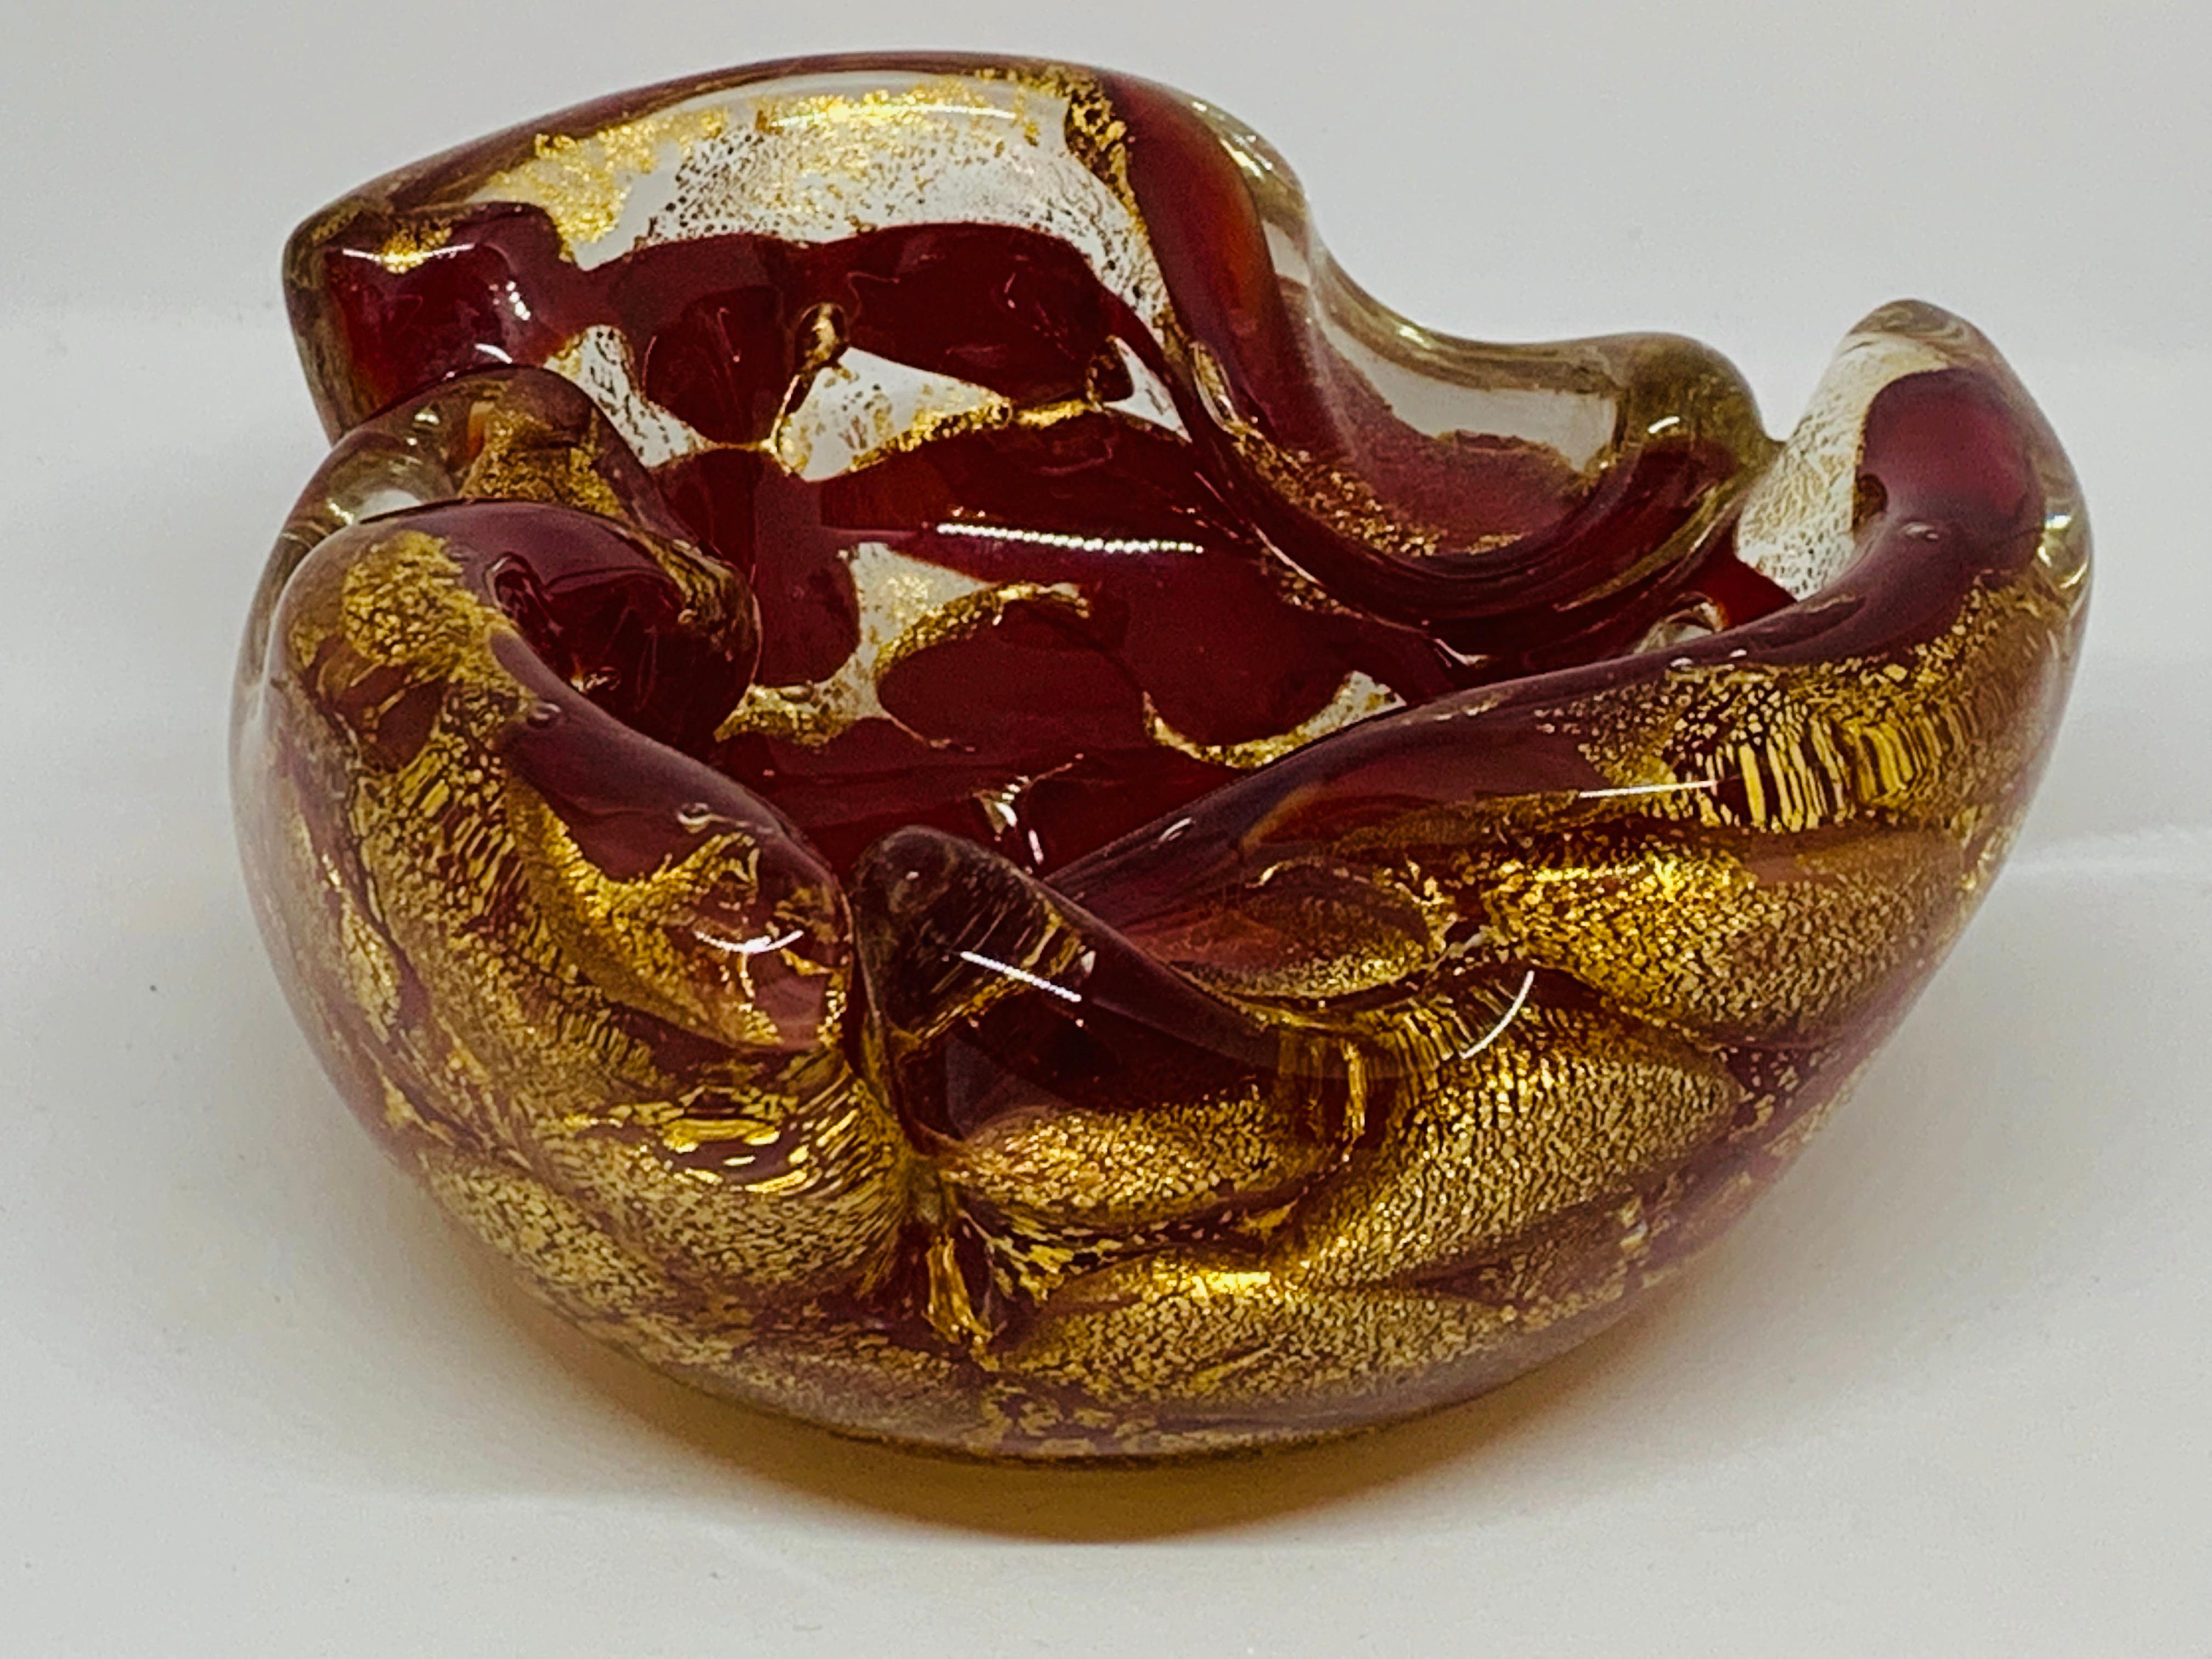 1950s Italian red, gold and clear Murano glass ashtray or bowl by Barovier and Toso. A stunning piece with gold infusions set in clear glass. The bowl has three indentations around the circumference to rest a cigarette in times of old. In very good